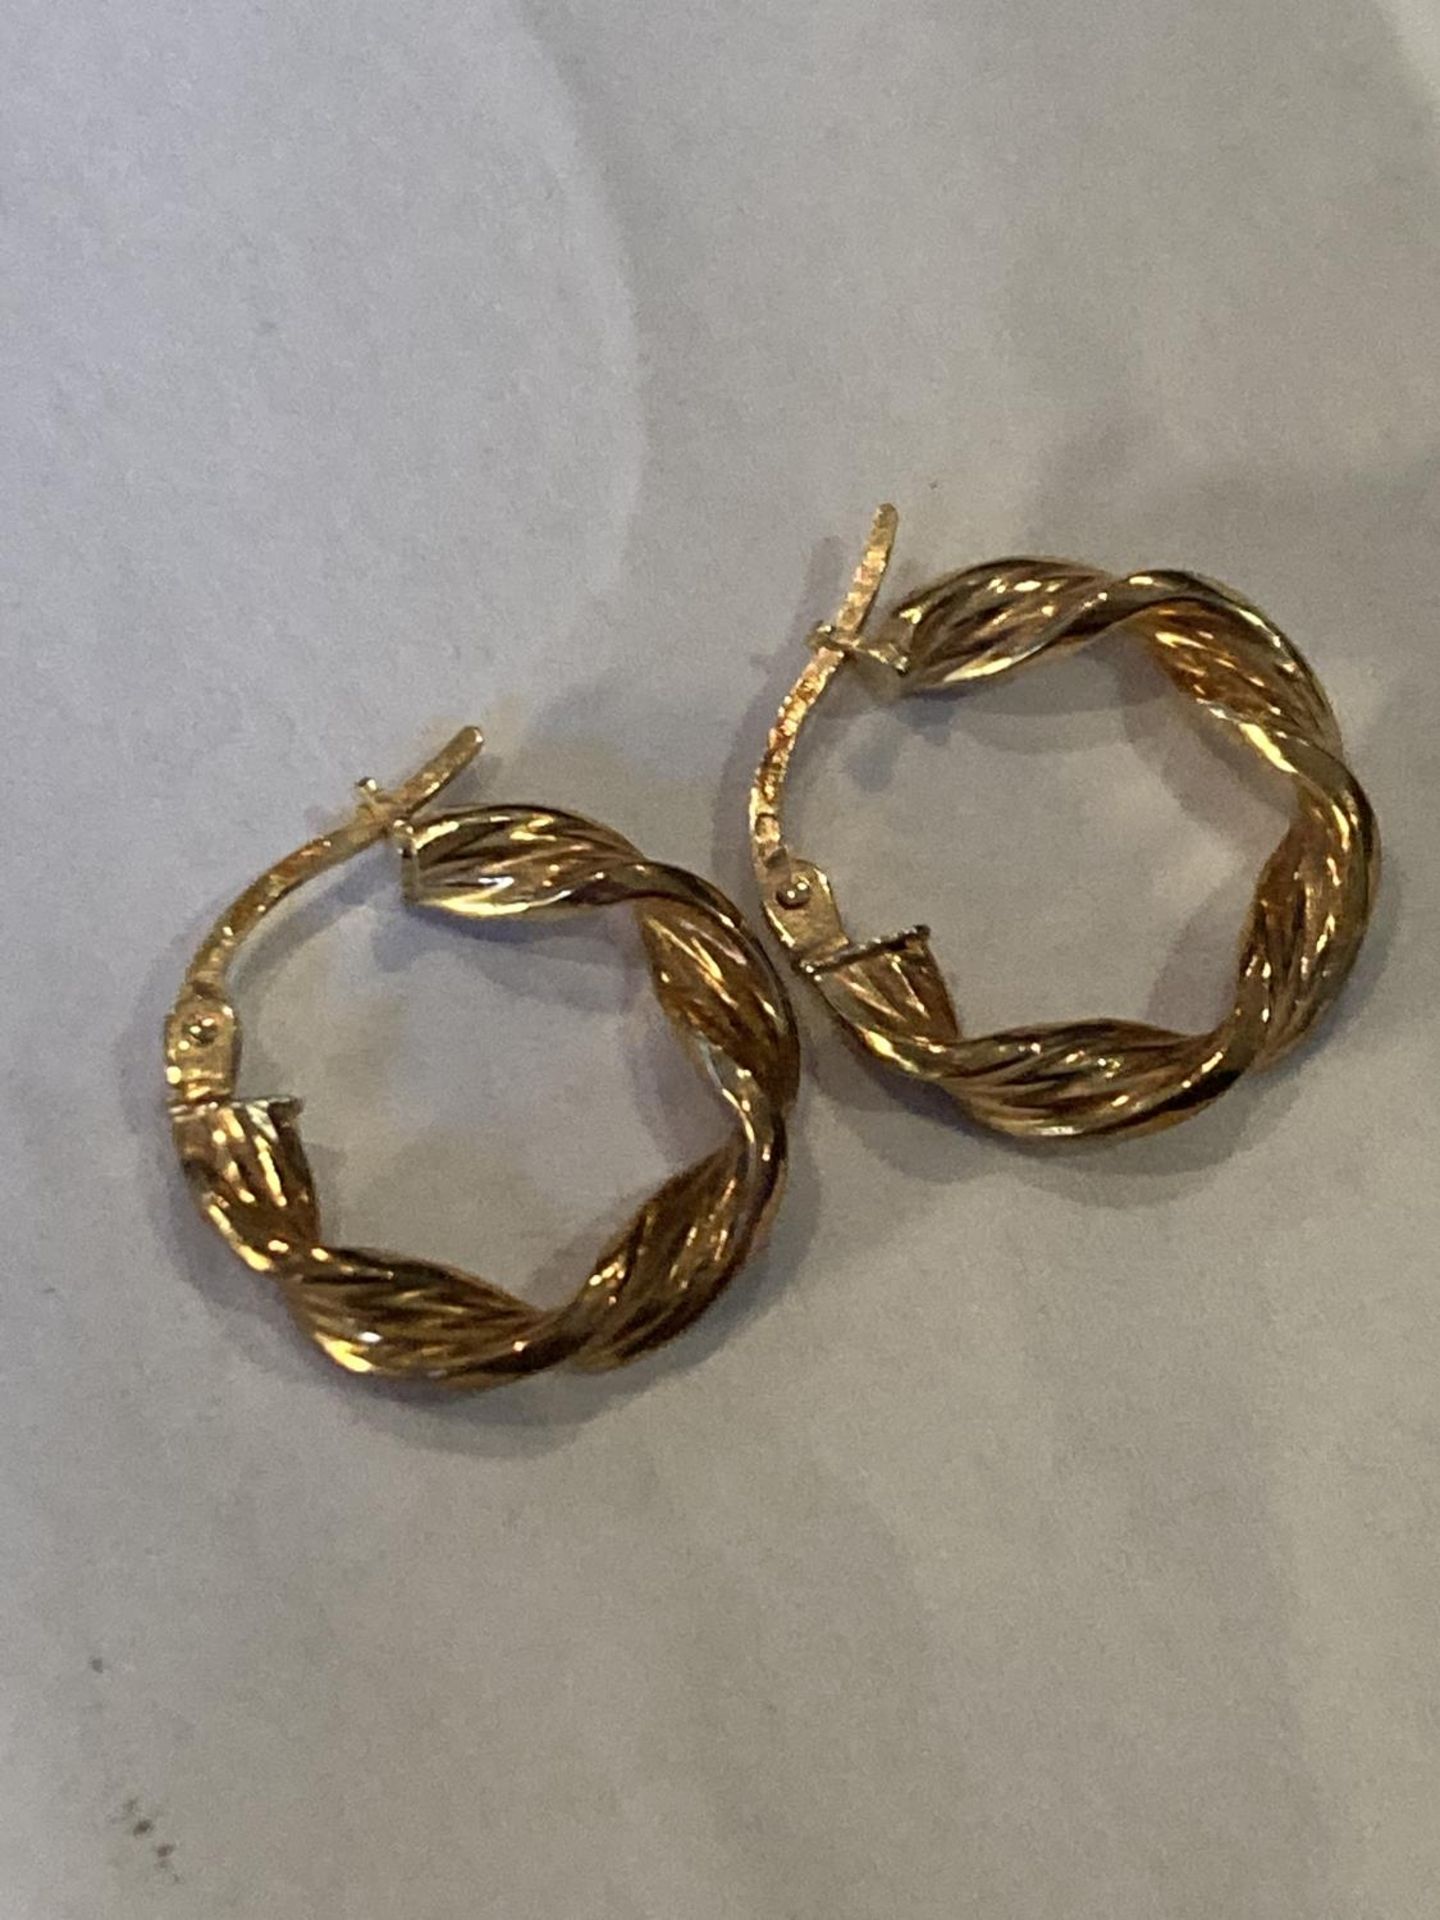 A PAIR OF 9 CARAT GOLD TWISTED HOOP EARRINGS GROSS WEIGHT 1.21 GRAMS - Image 3 of 6